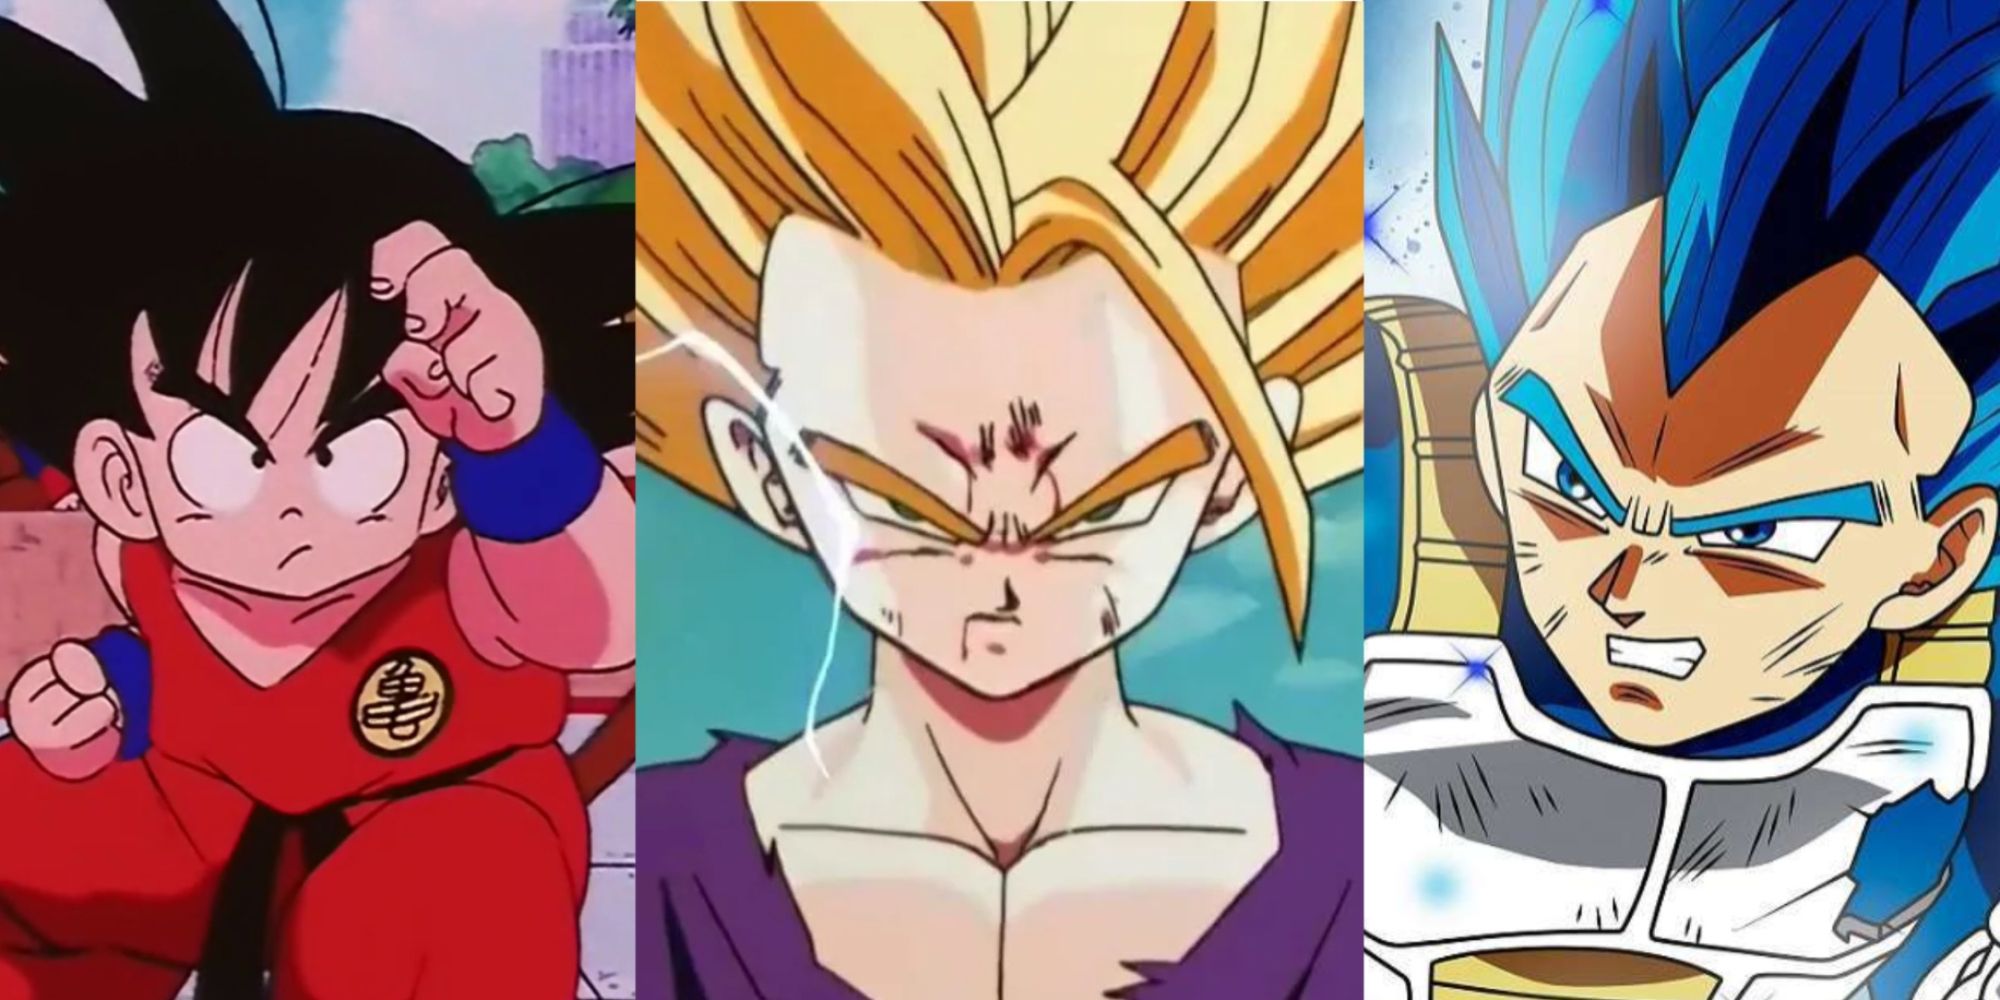 Where To Watch Dragon Ball Series And Movies Featured Split Image Including Kid Goku, Teen Gohan, and Vegeta